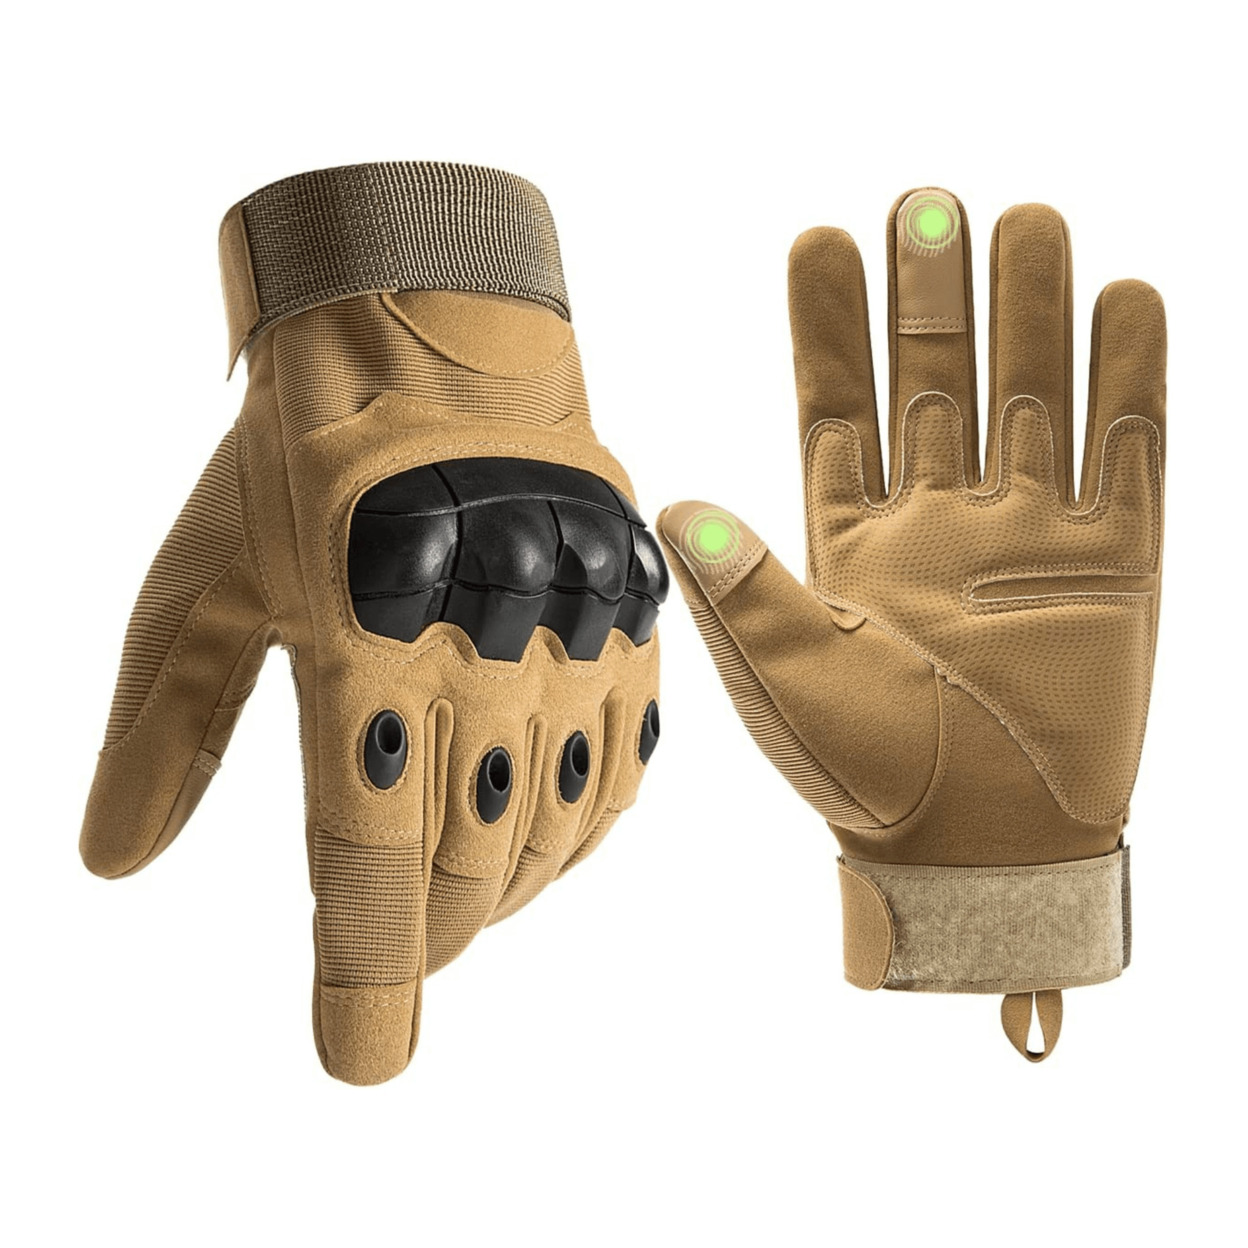 Tactical Military Airsoft Gloves For Outdoor Sports, Paintball, And Motorcycling With Touchscreen Fingertip Capability - Tan, Large